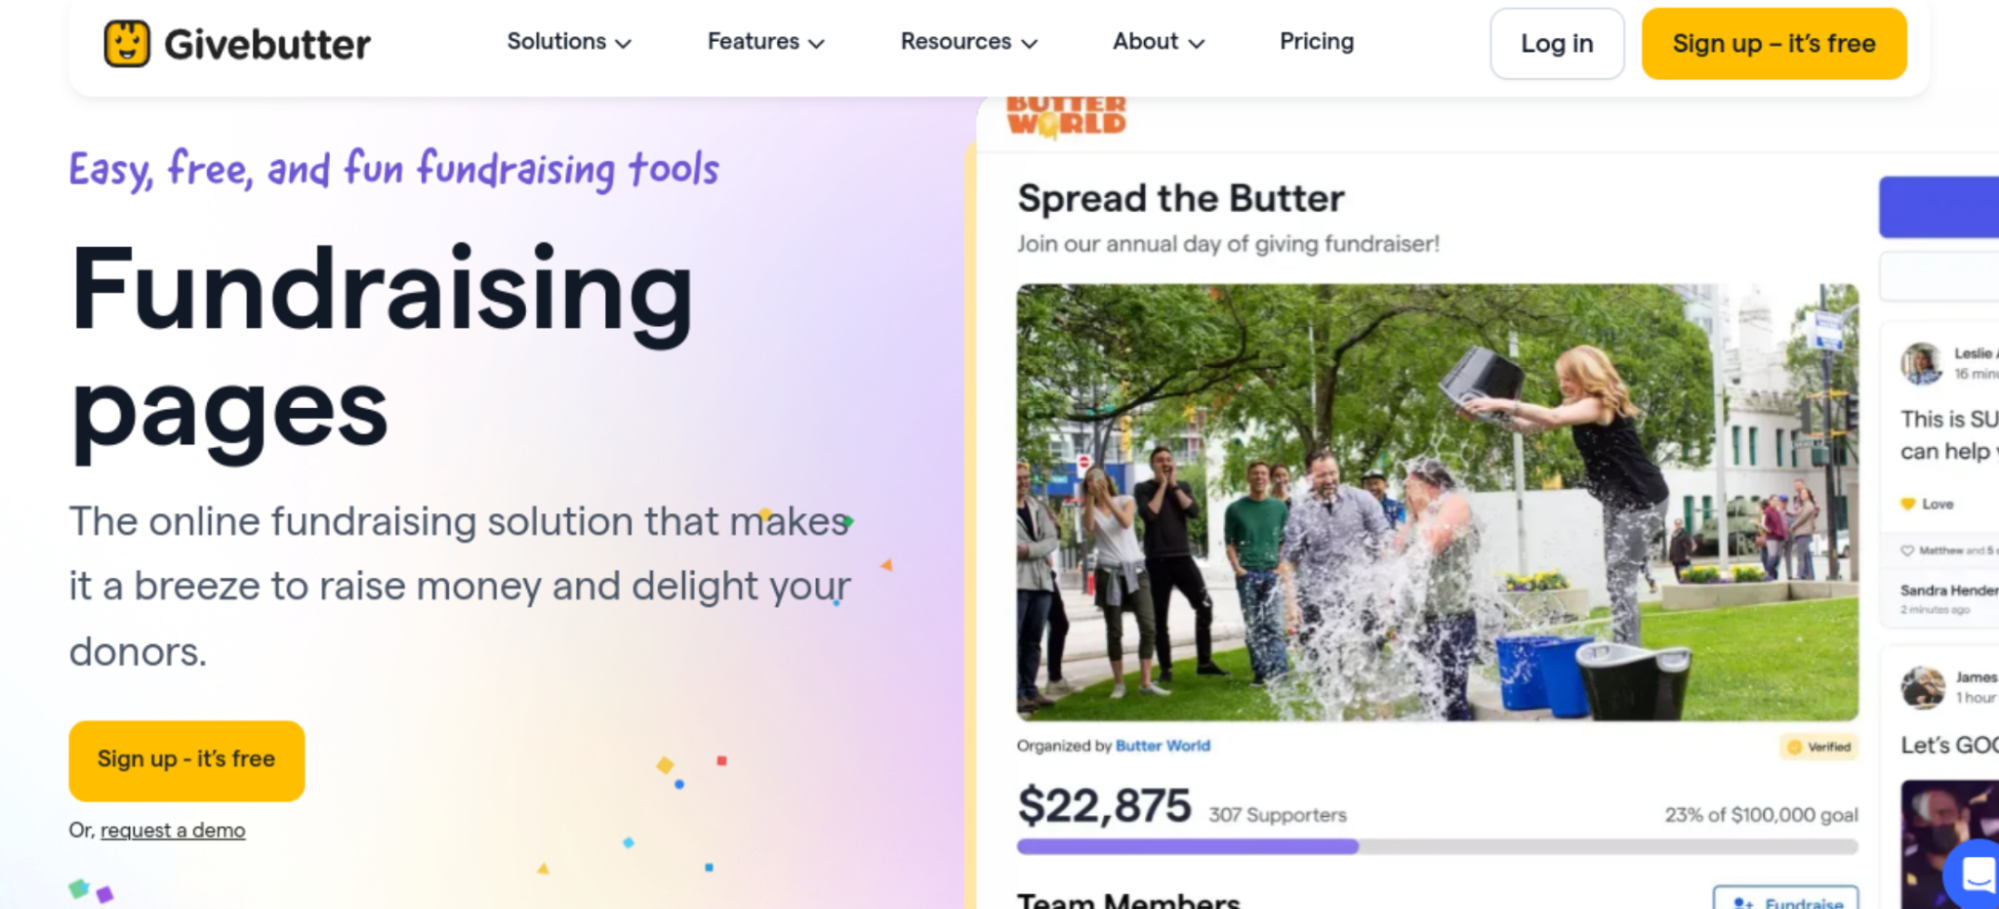 Givebutter fundraising pages have some crowdfunding features